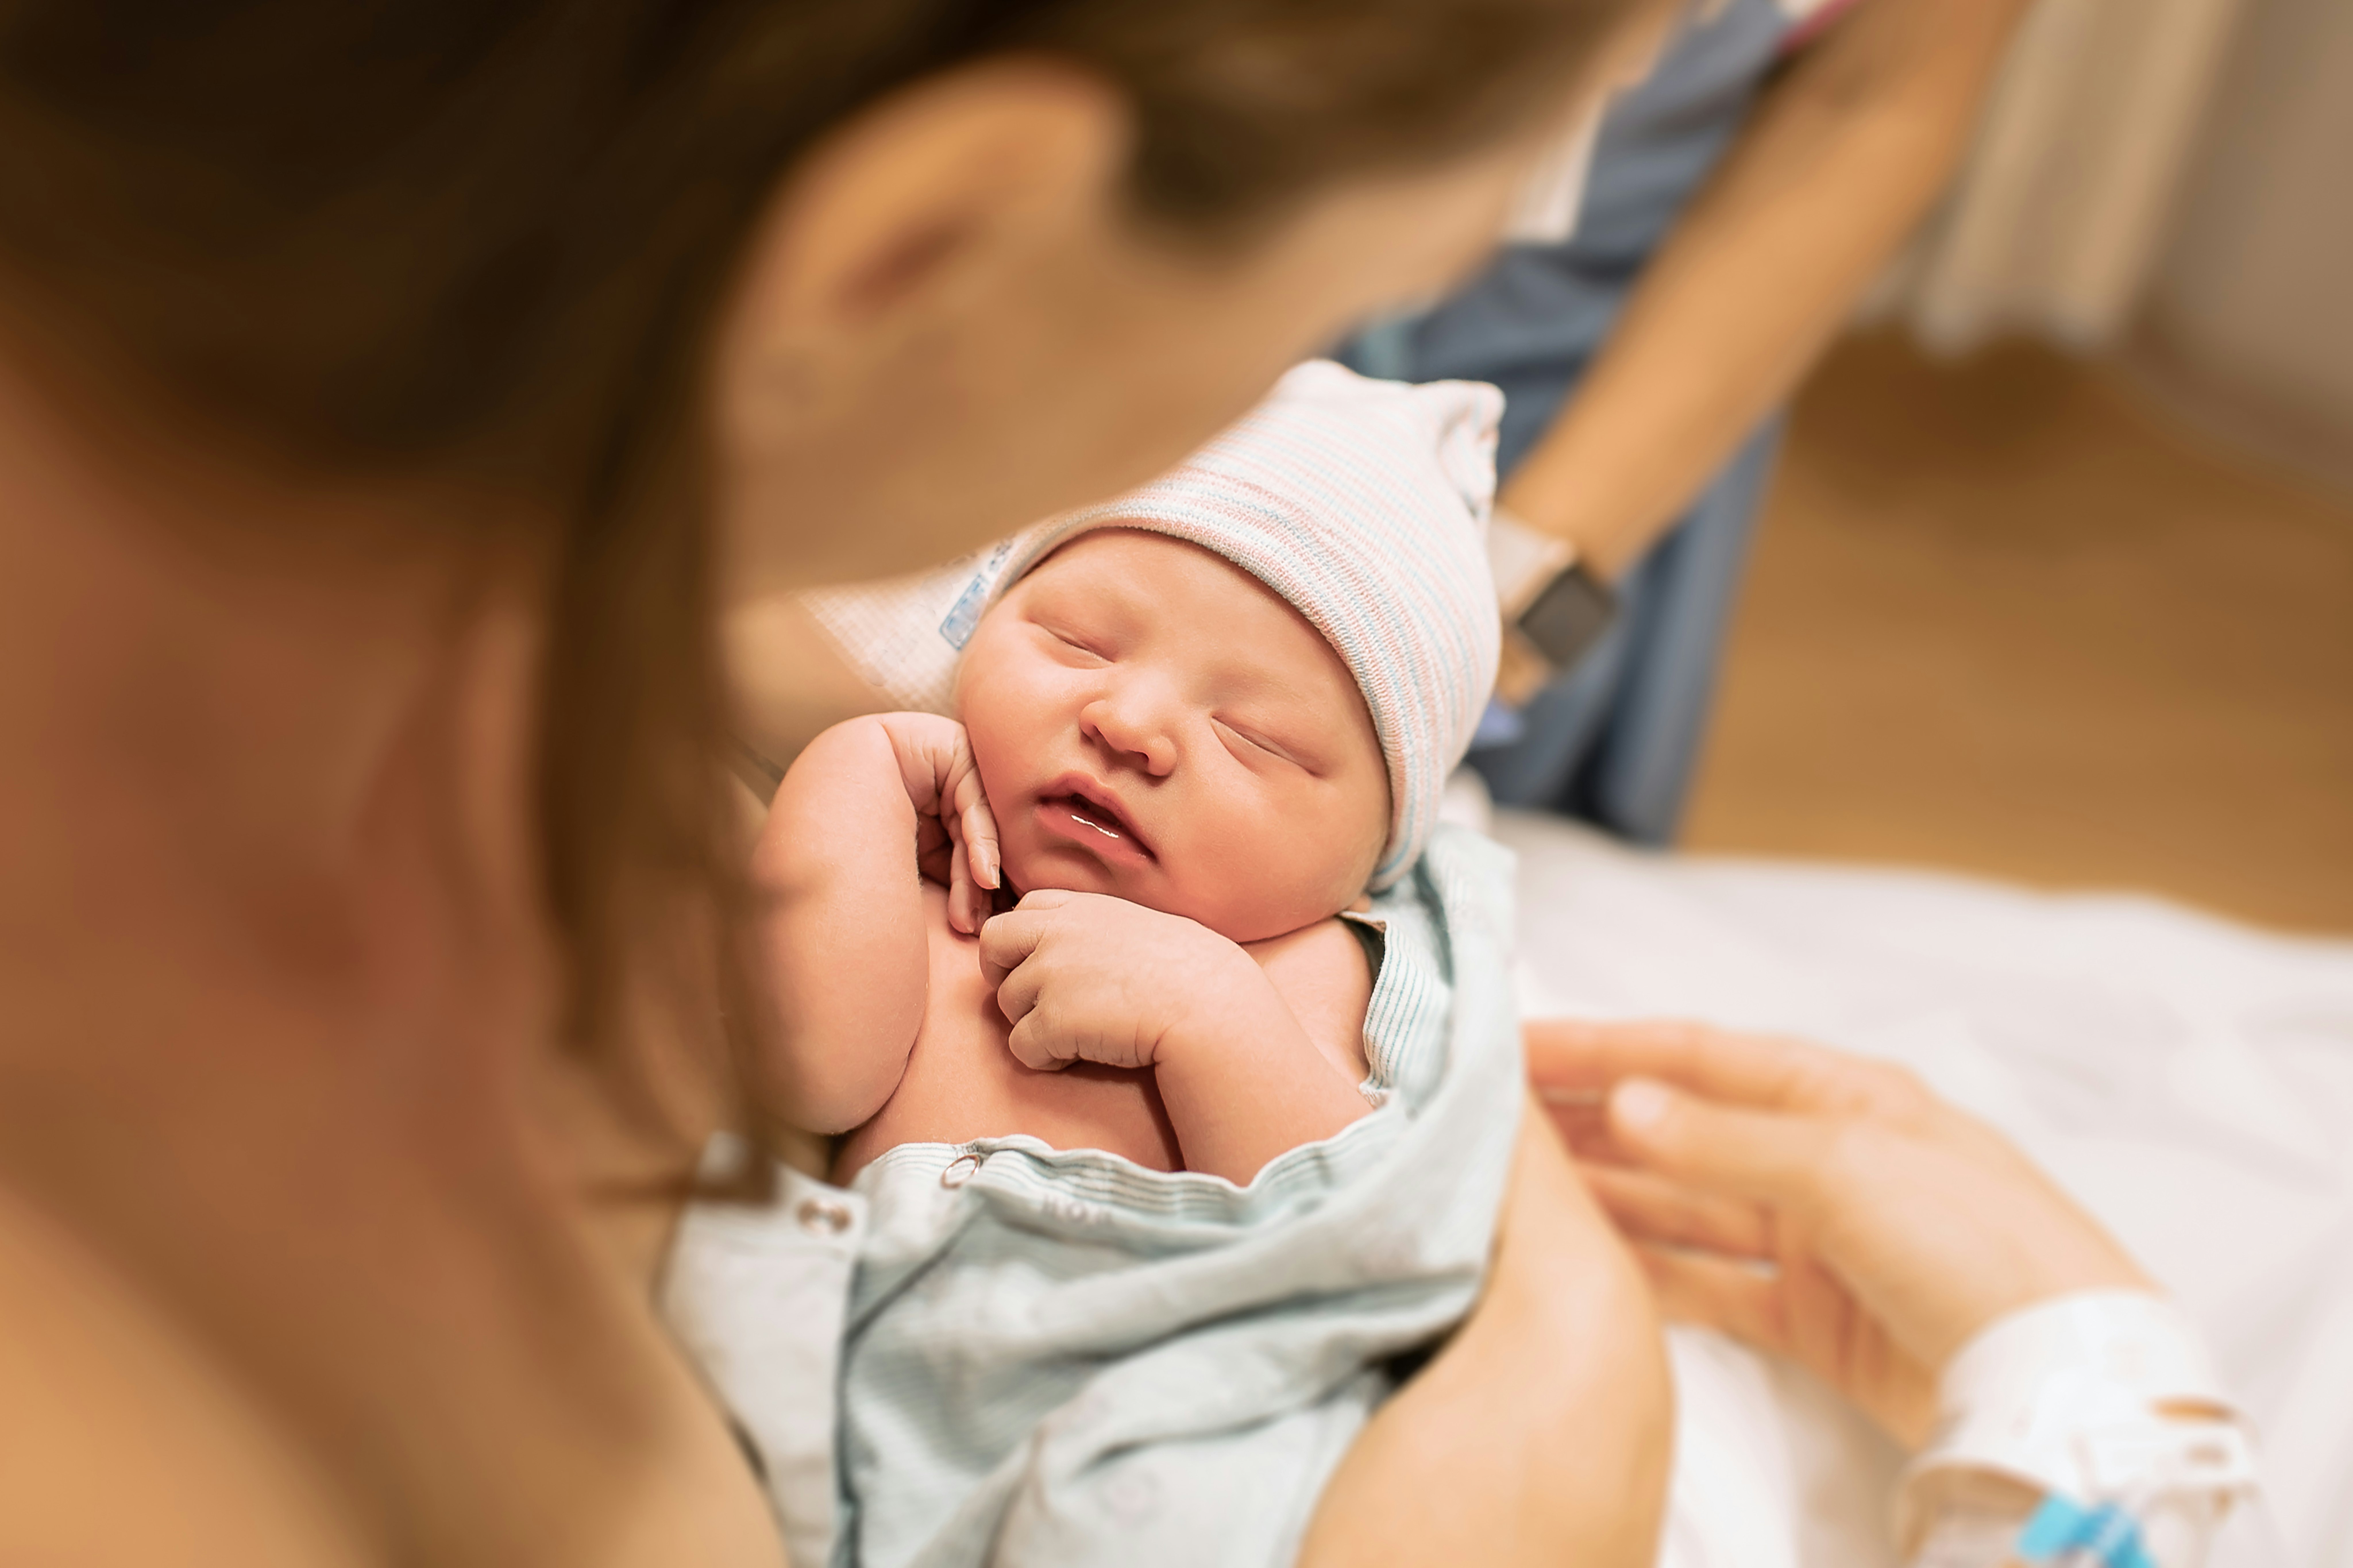 Your newborn knows you by scent and sound